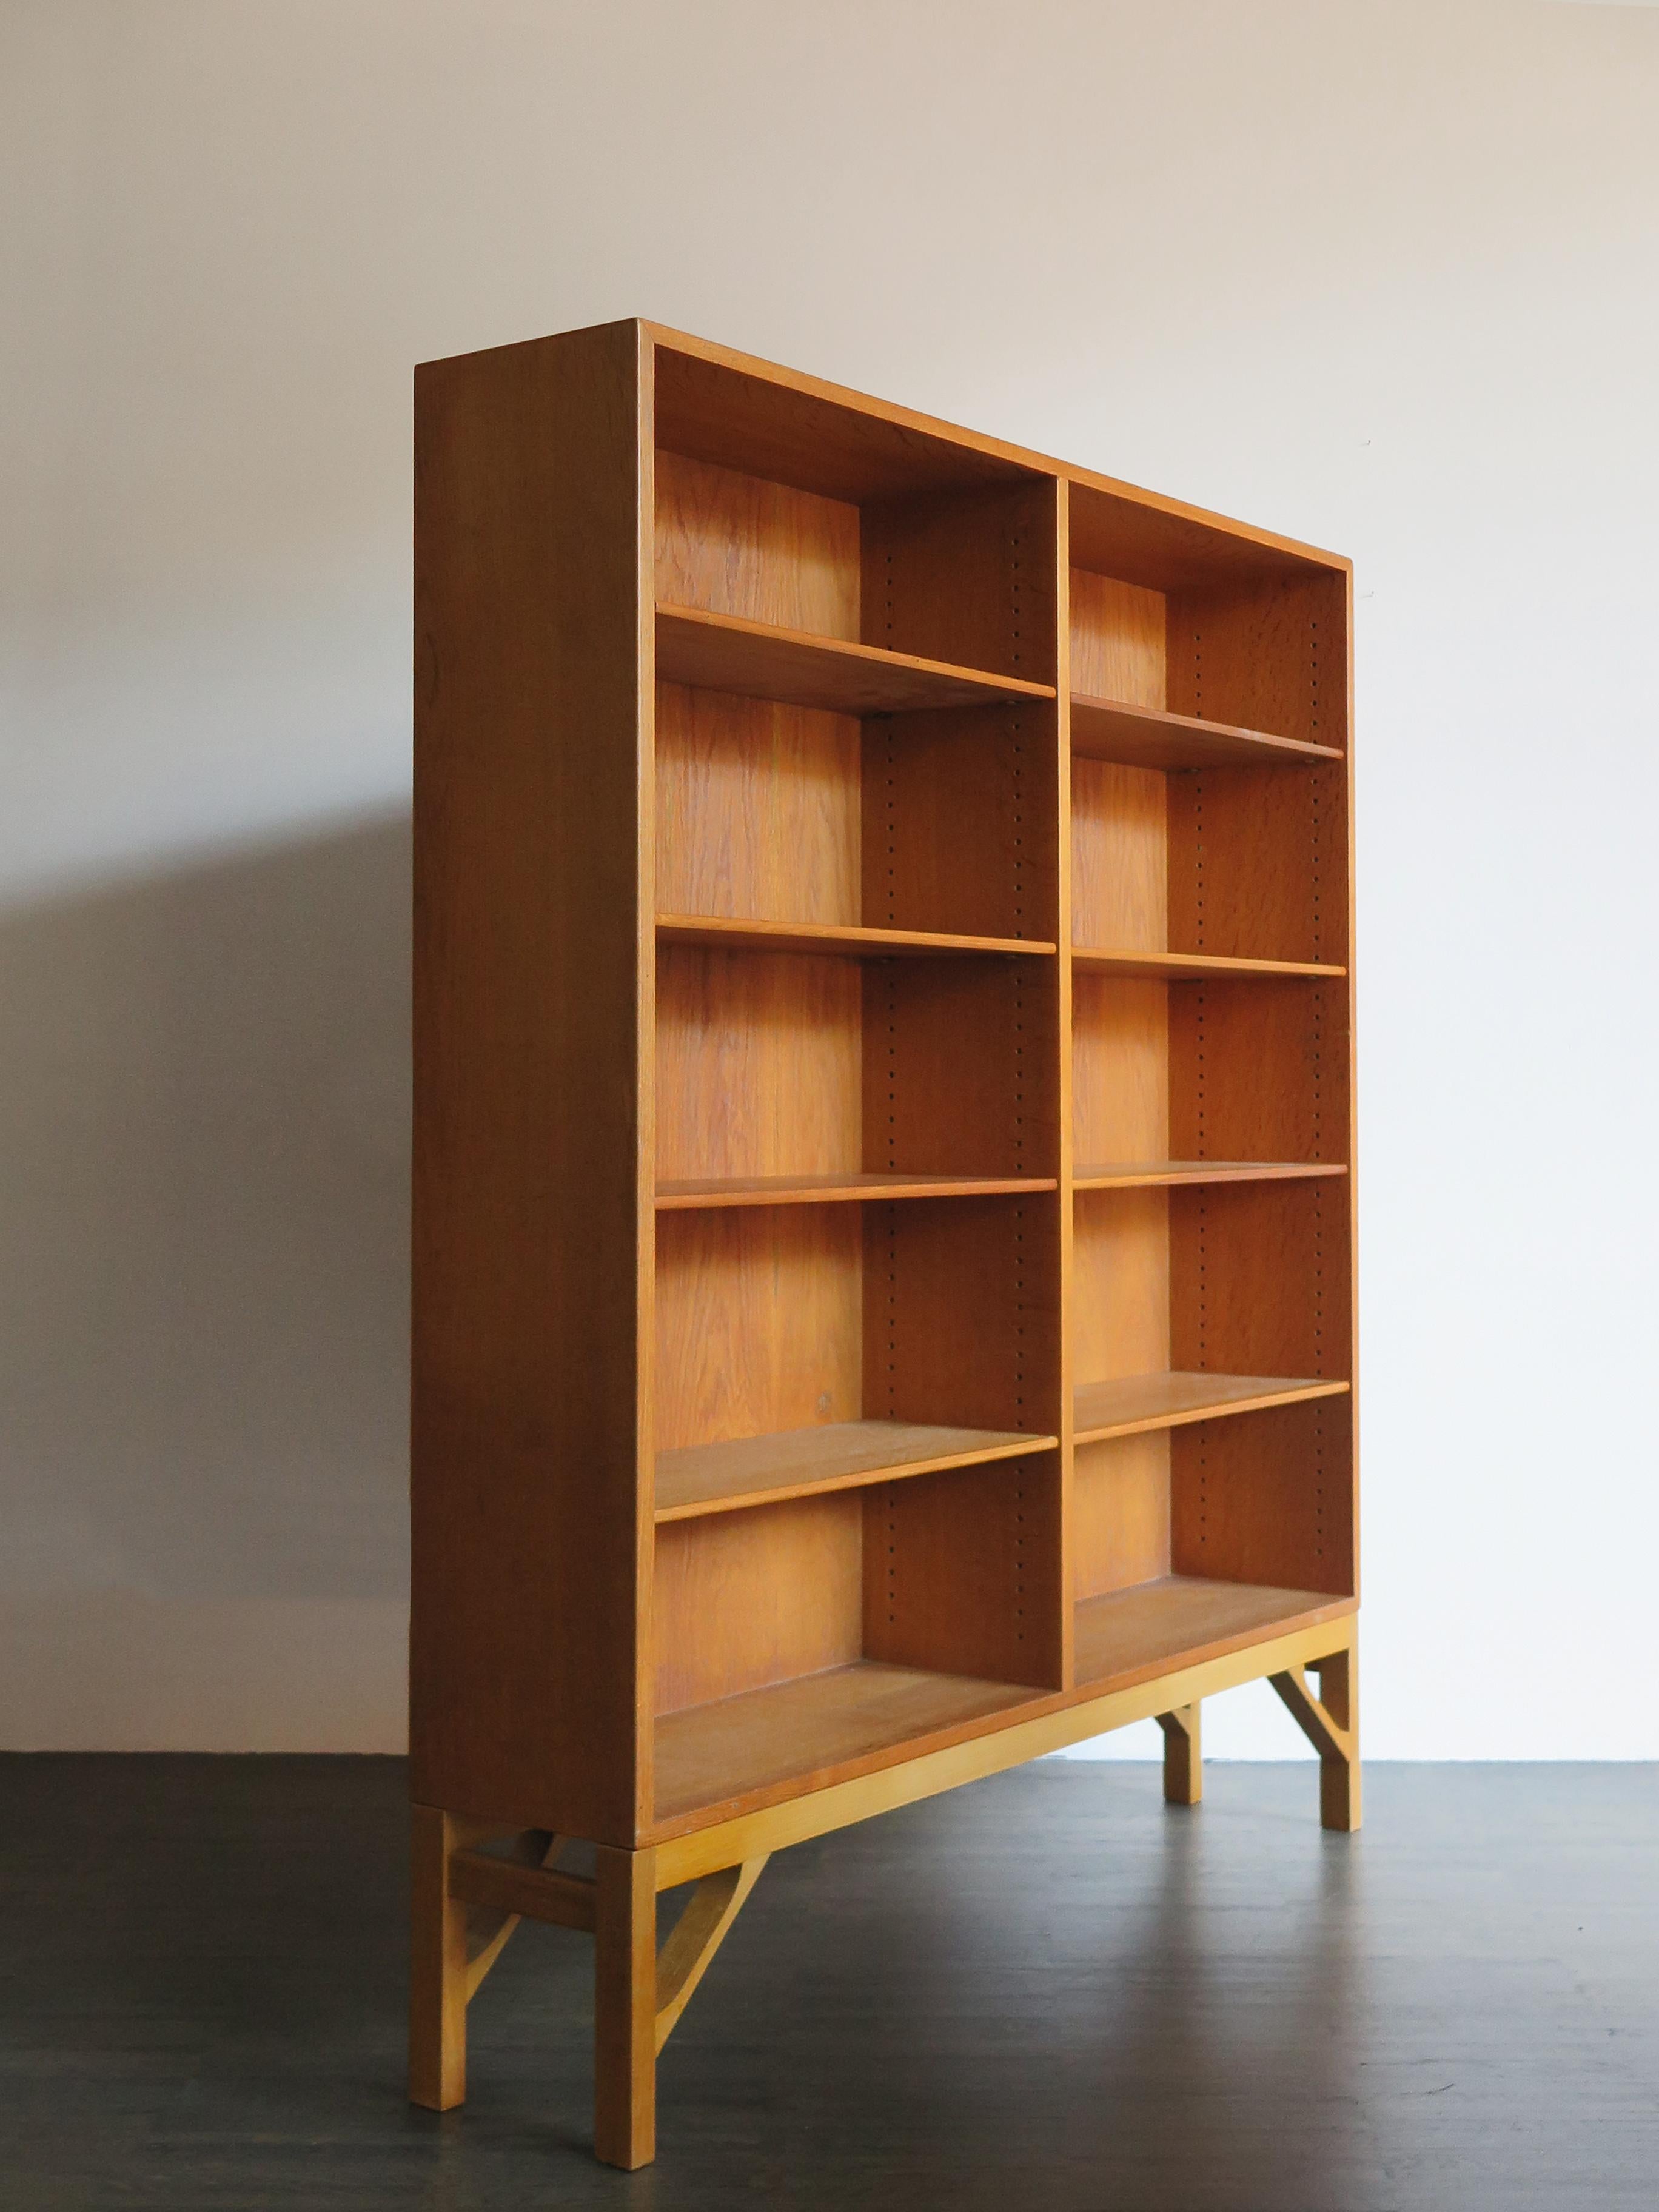 Scandinavian midcentury modern design oak bookcase designed by Børge Mogensen in the 1950s and produced by FDB Møbler from 1960s, variable height position of shelves, circa 1960s.

Please note that the item is original of the period and this shows